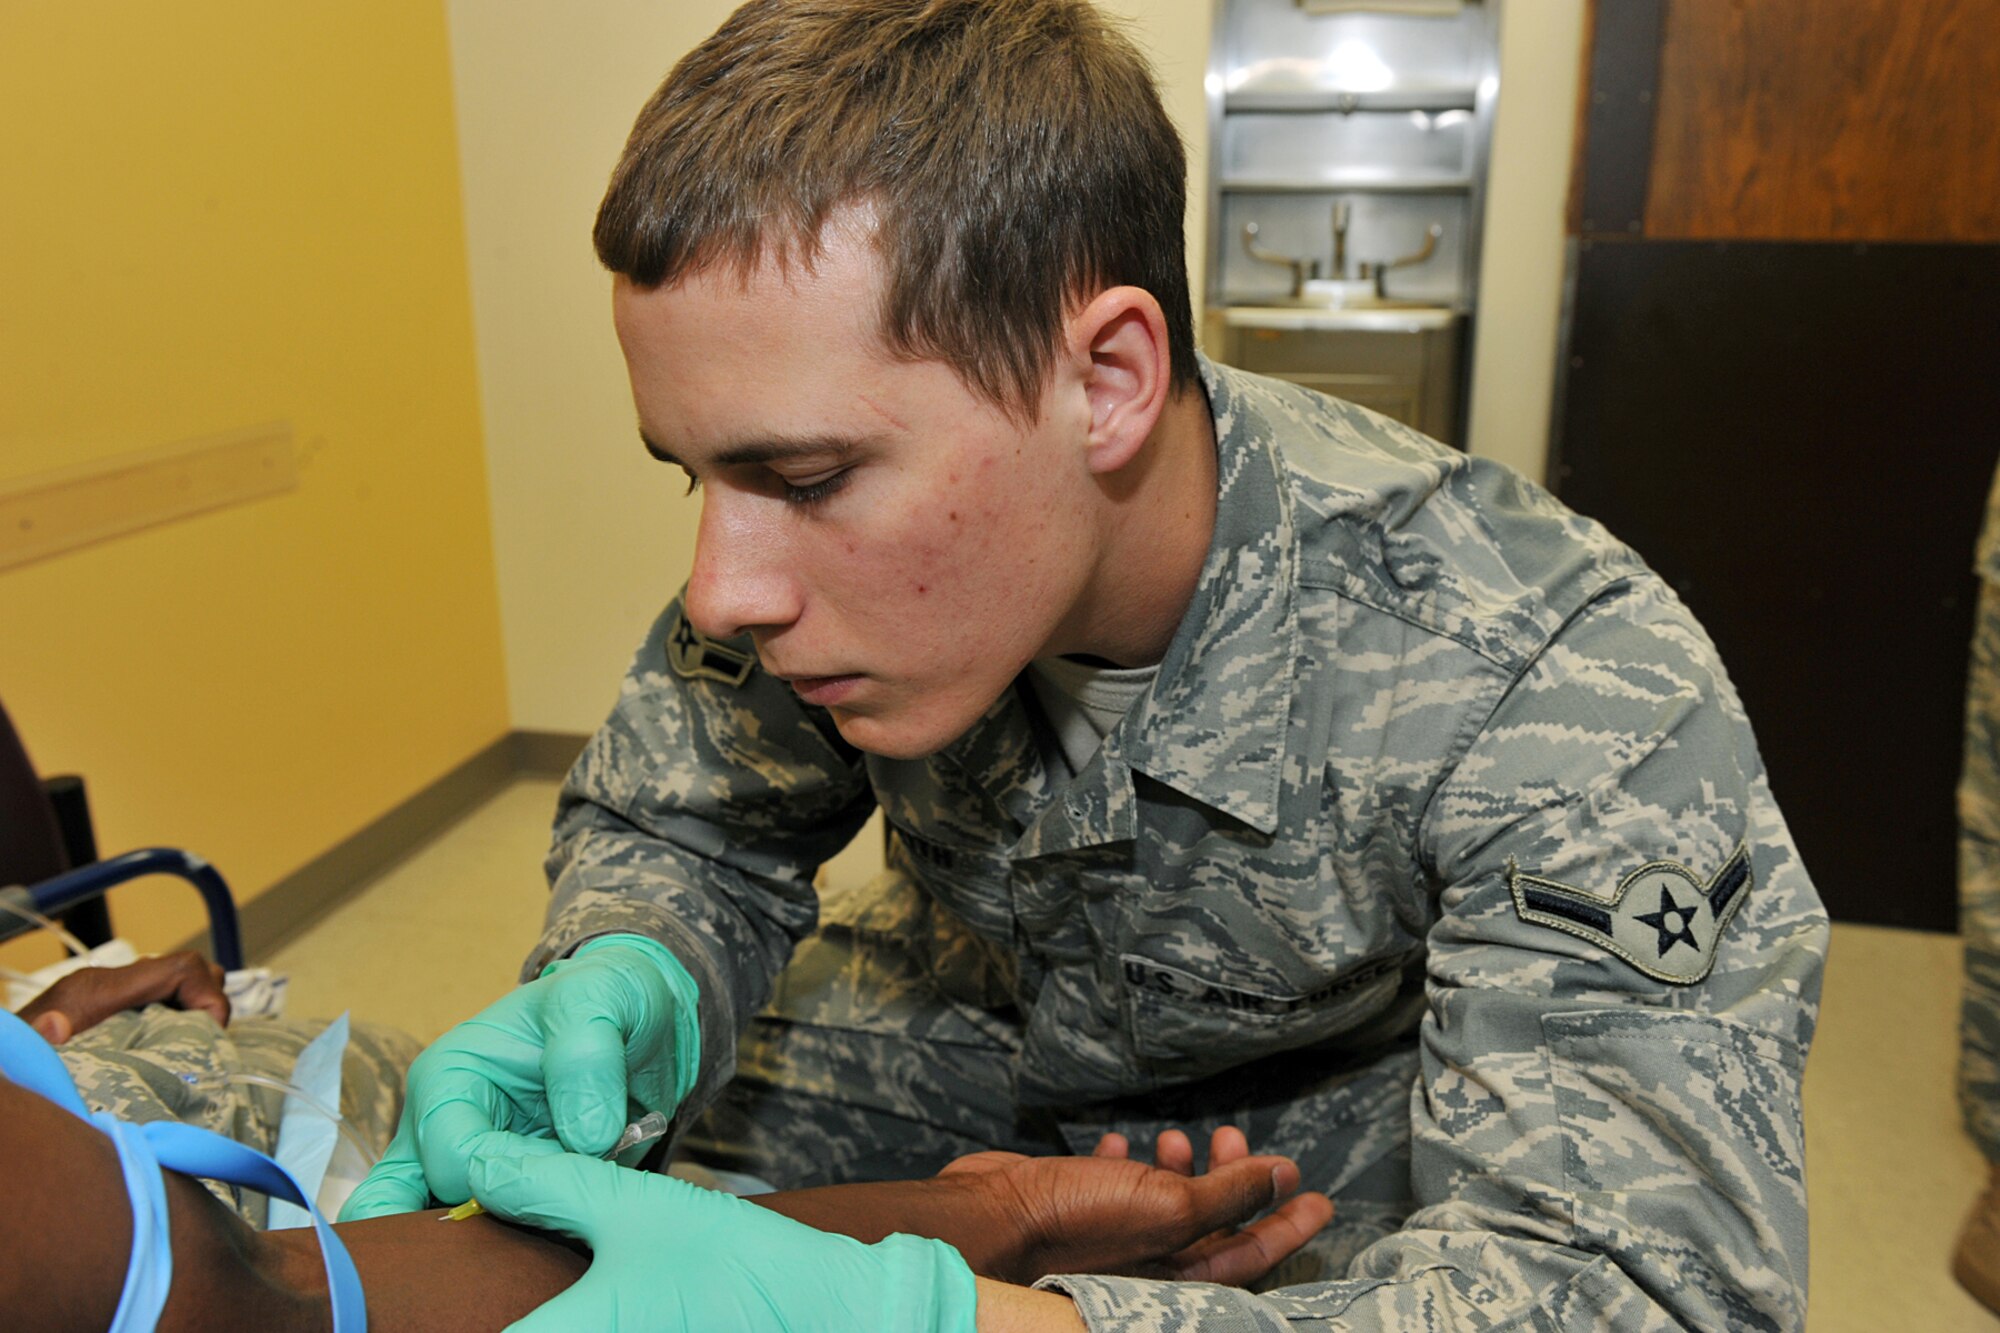 OFFUTT AIR FORCE Neb,.-- Airman Zachary Griffith, 55th Medical Group, searches for a vein in the arm of Airman 1st Class Isaac Zawolo, 55th Medical Group, before administering intravenous therapy inside the Ehrling Bergquist Clinic here April 26. The 55th MDG scored an outstanding rating on their recent Health Services Inspection becoming the first unit in the continental United States to do so this year. U.S. Air Force Photo by Charles Haymond